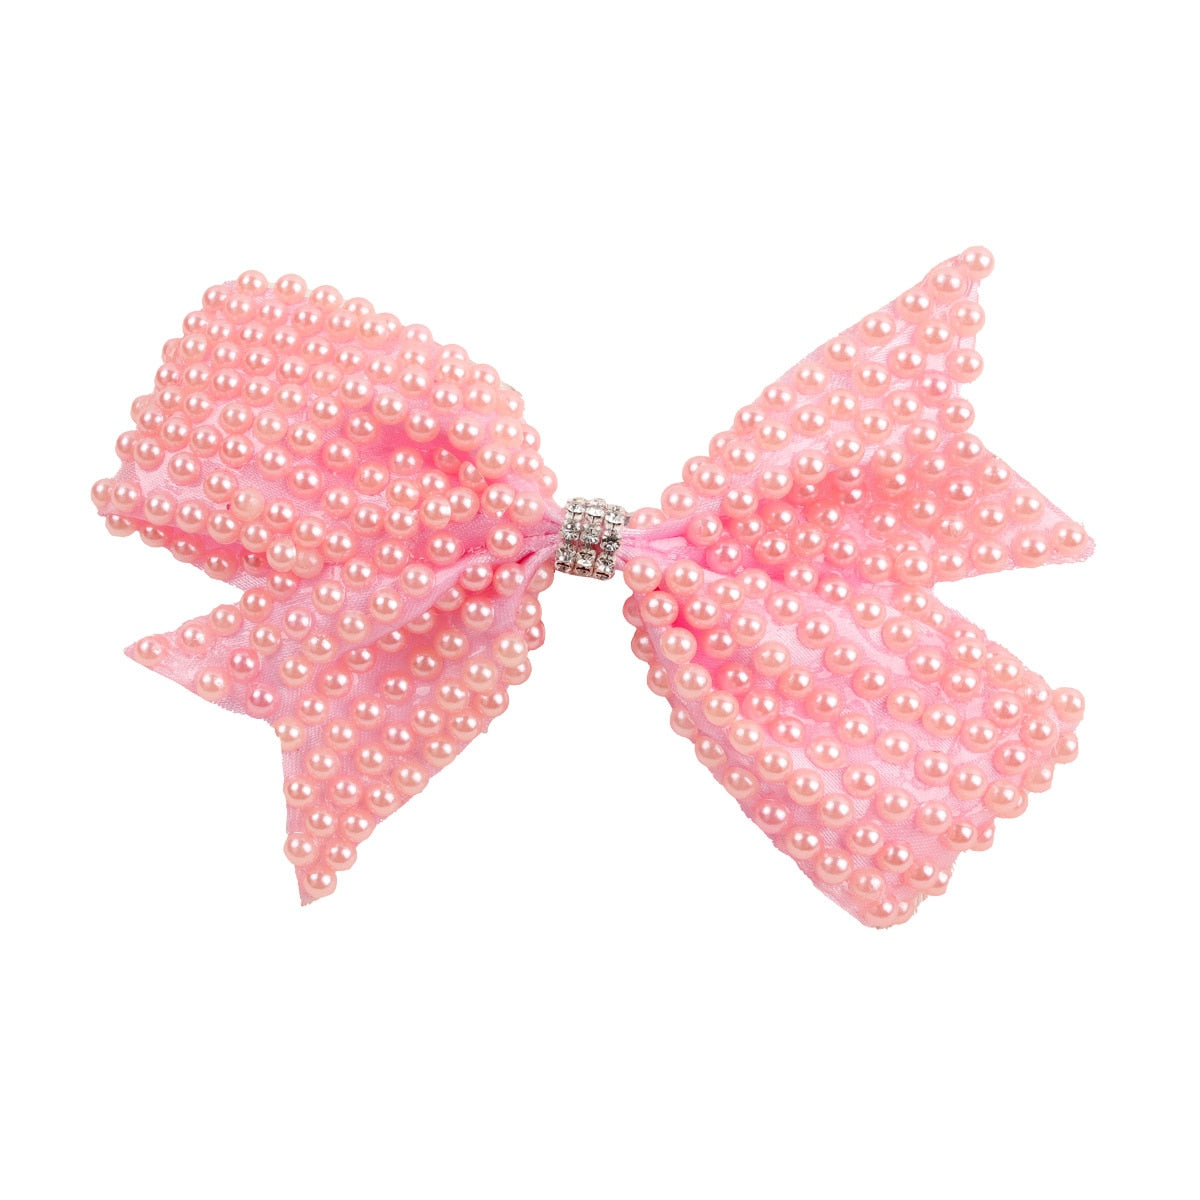 White Pearl Hair Bows With Hair Clips For Girls Kids Boutique Layers Bling Rhinestone Center Bows Hairpins Hair Accessories